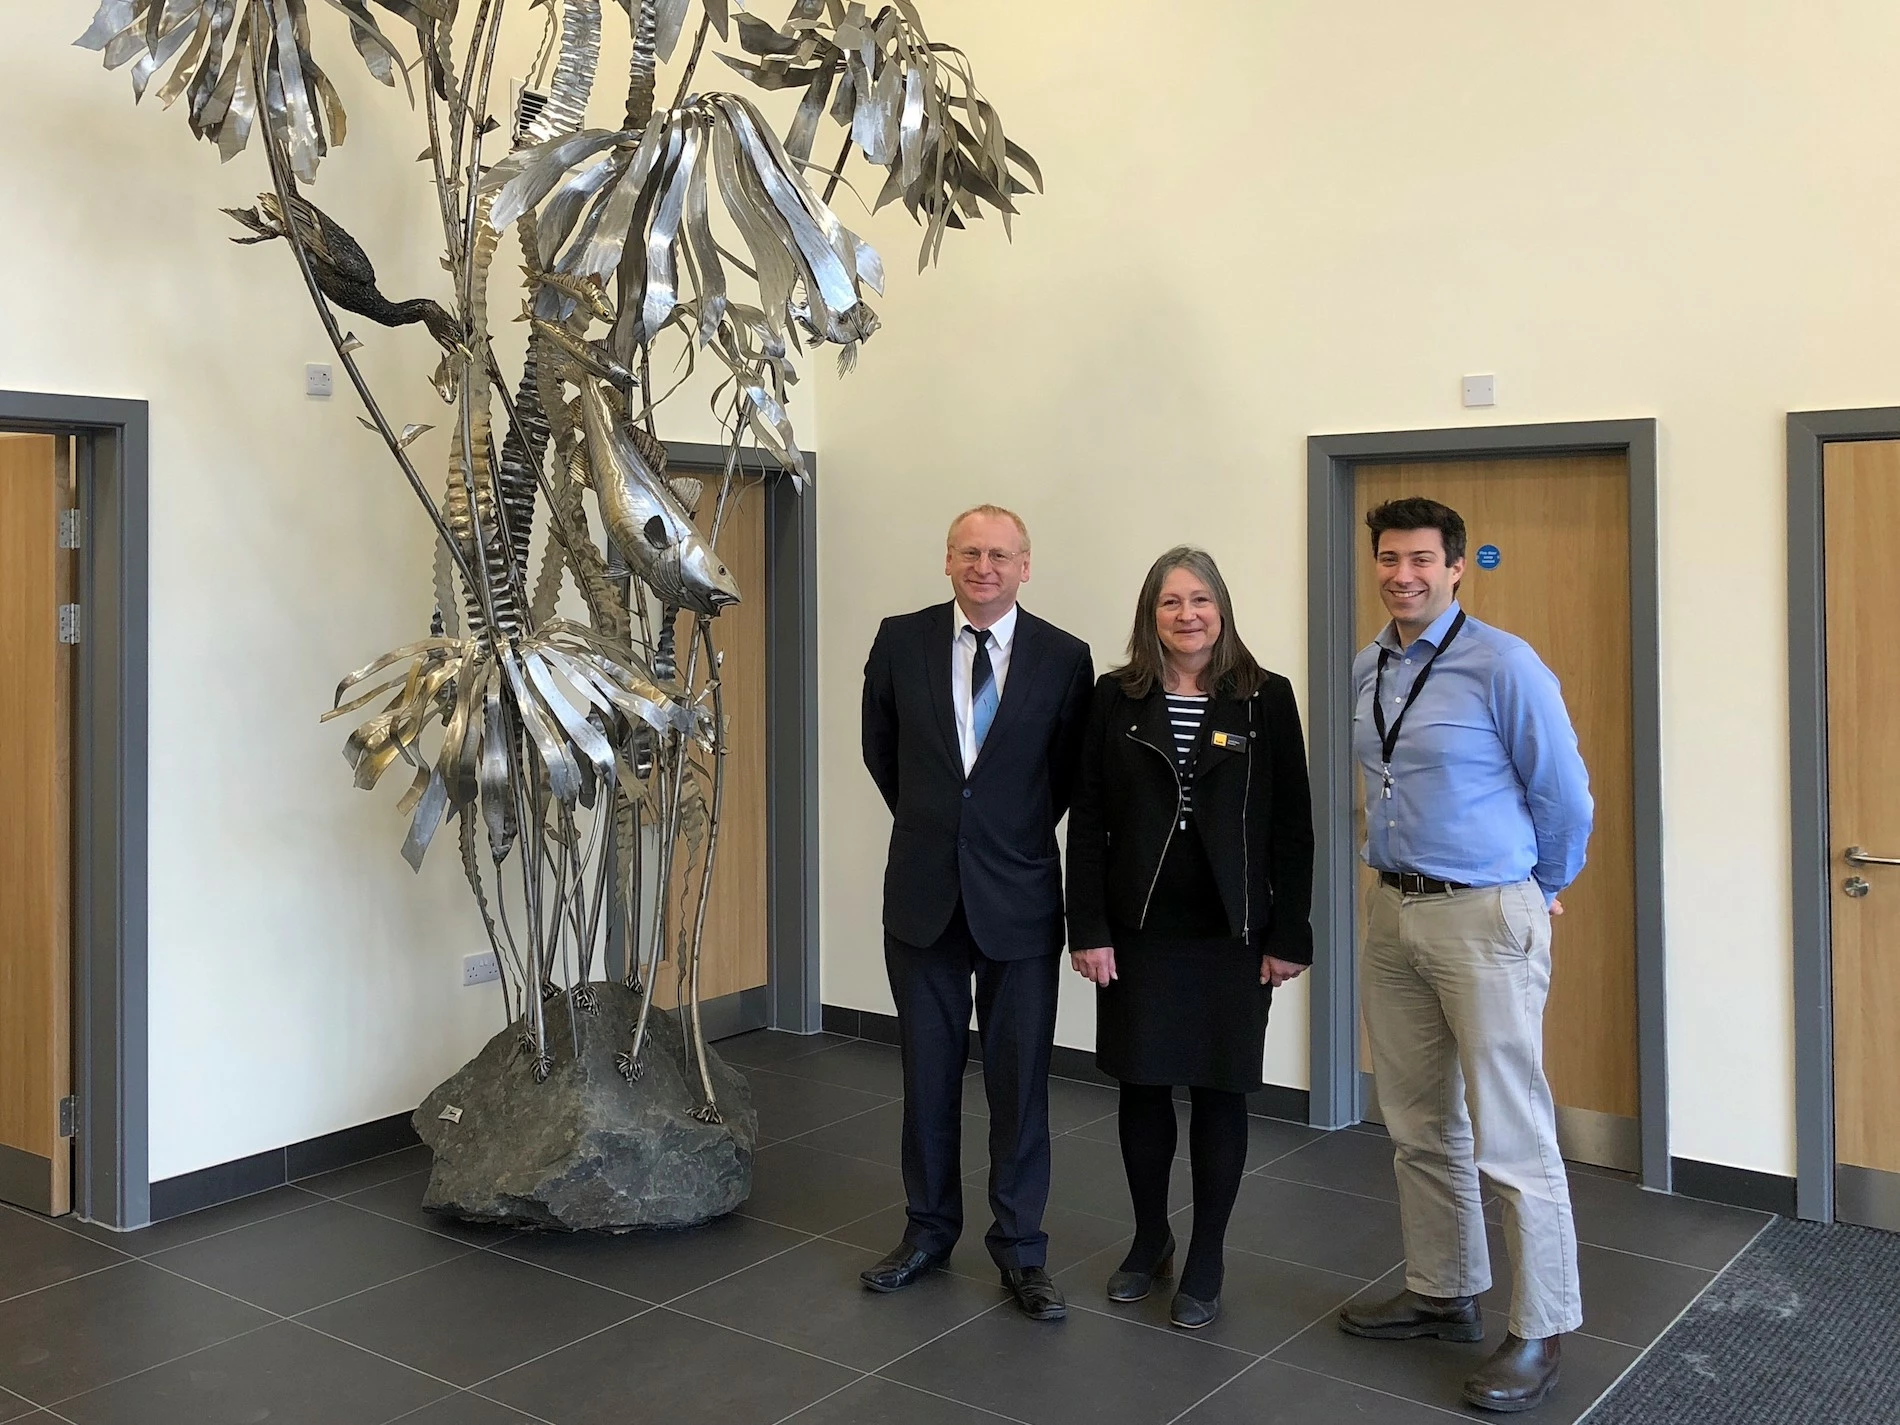 David Hodgson, senior relationship manager, Judith Ness, finance director and Scott Rutherford, lead surgeon and orthopaedic veterinary specialist.